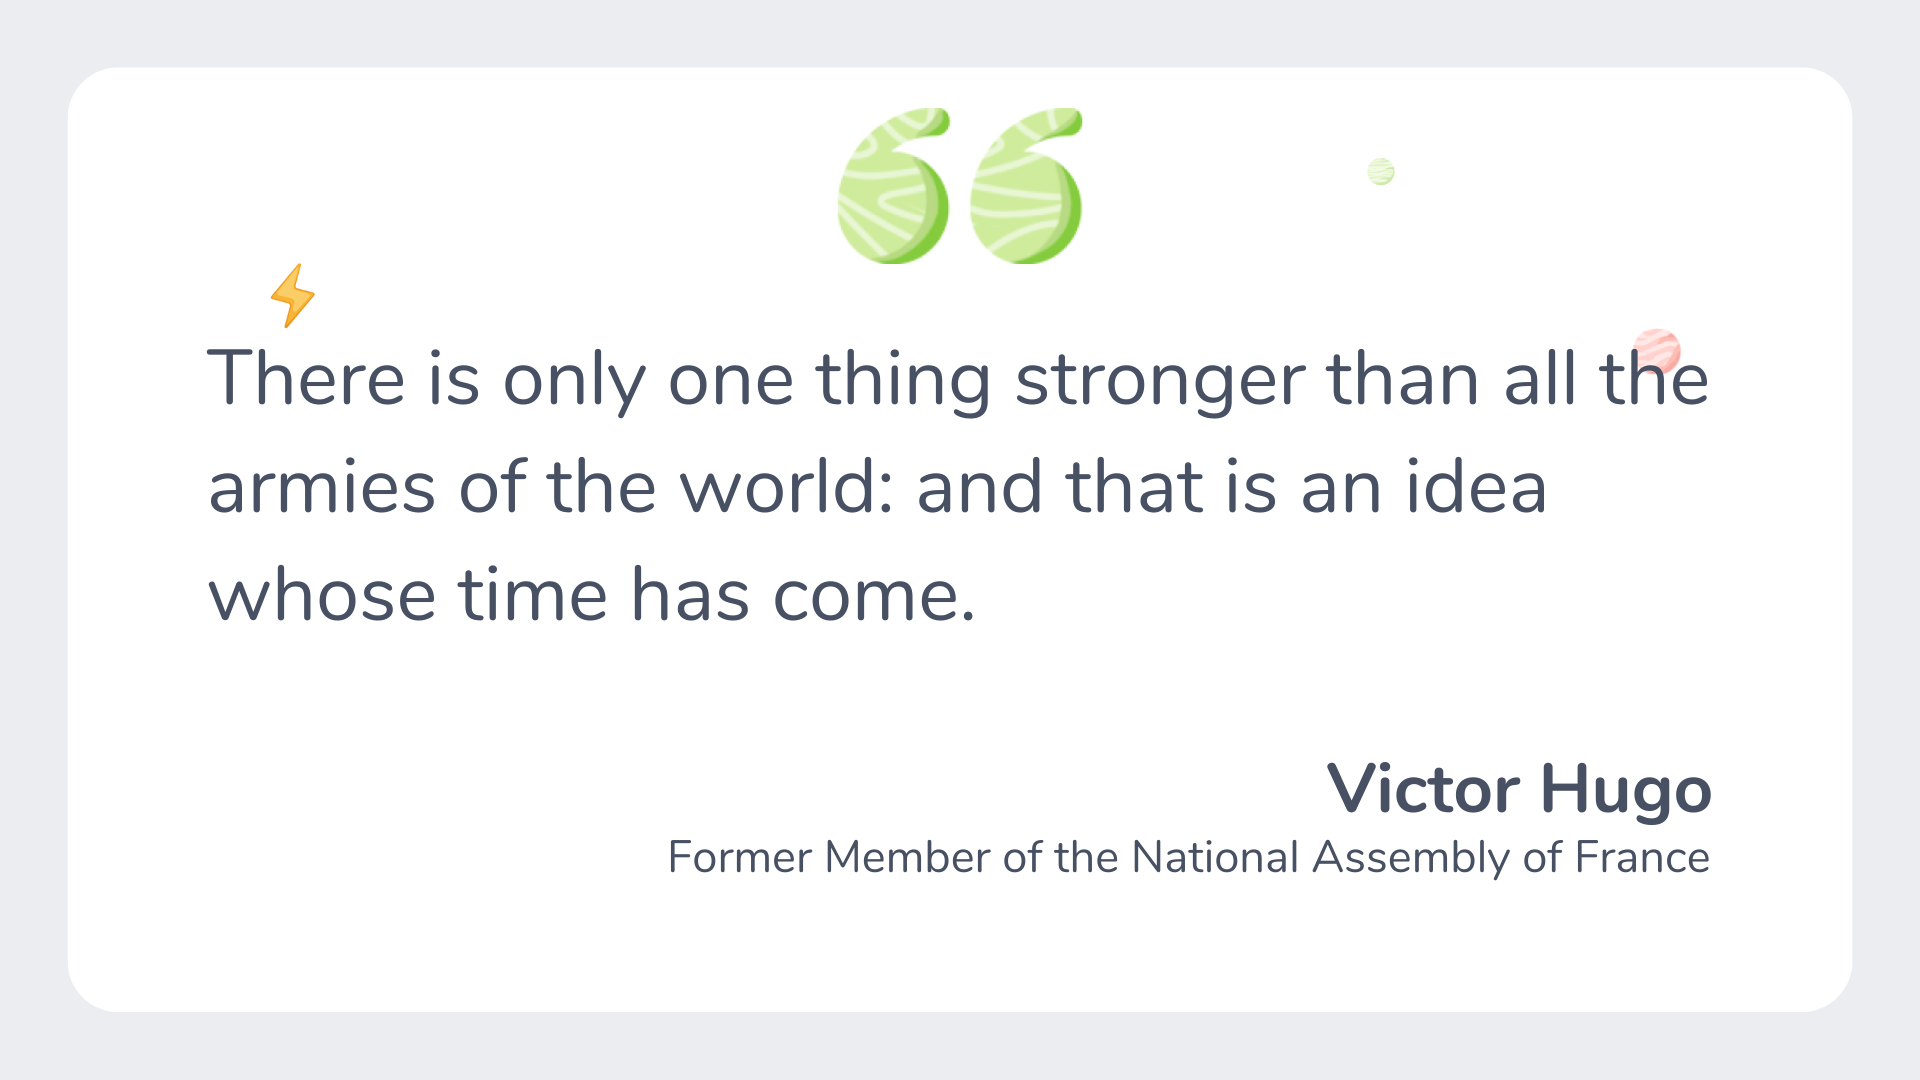 Quote by Victor Hugo (Former Member of the National Assembly of France)